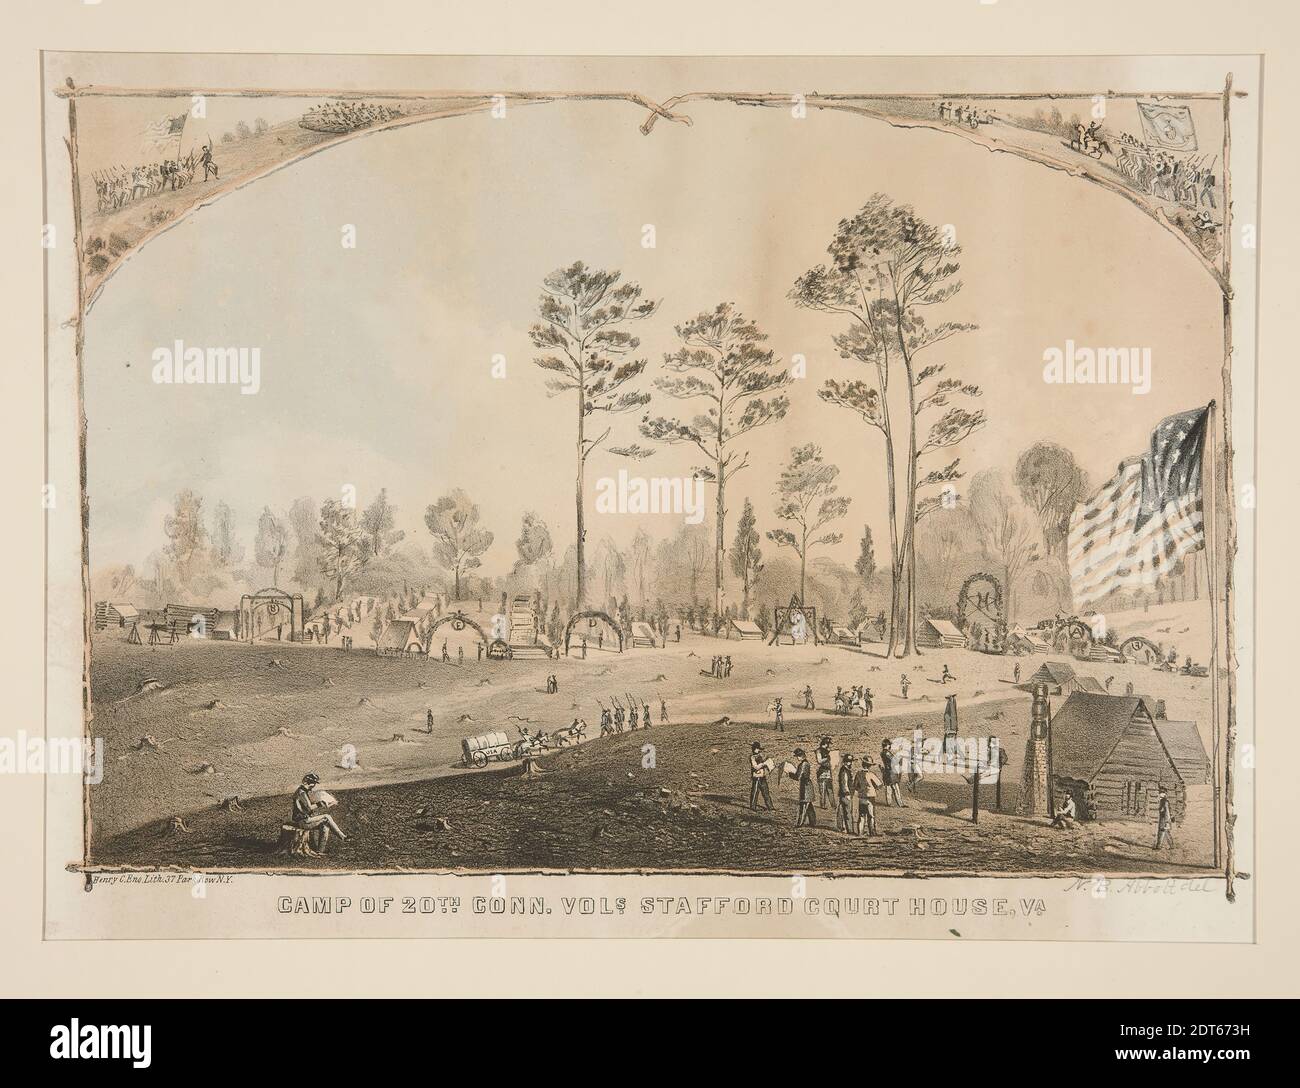 Artist: N.B. Abbott, American, After: Henry C. Eno, American, Camp of 20th Conn. Vol.s, Stafford Court House, Va., Lithograph in colors, sheet: 25.8 × 33 cm (10 3/16 × 13 in.), Made in United States, American, 19th century, Works on Paper - Prints Stock Photo